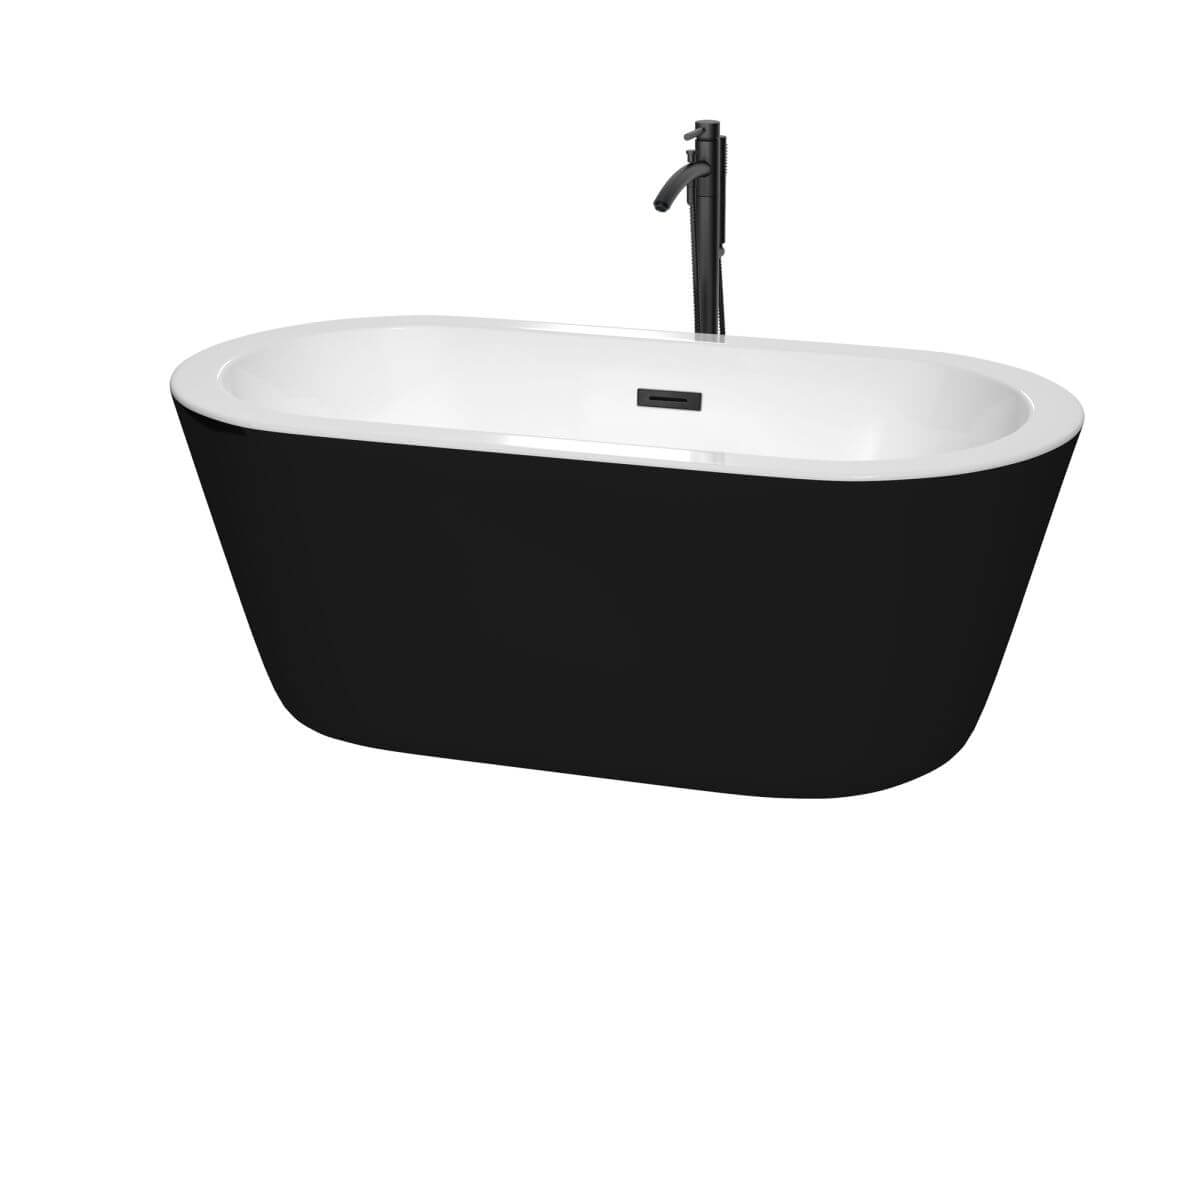 Wyndham Collection Mermaid 60 inch Freestanding Bathtub in Black with White Interior, Floor Mounted Faucet, Drain and Overflow Trim in Matte Black - WCOBT100360BKMBATPBK